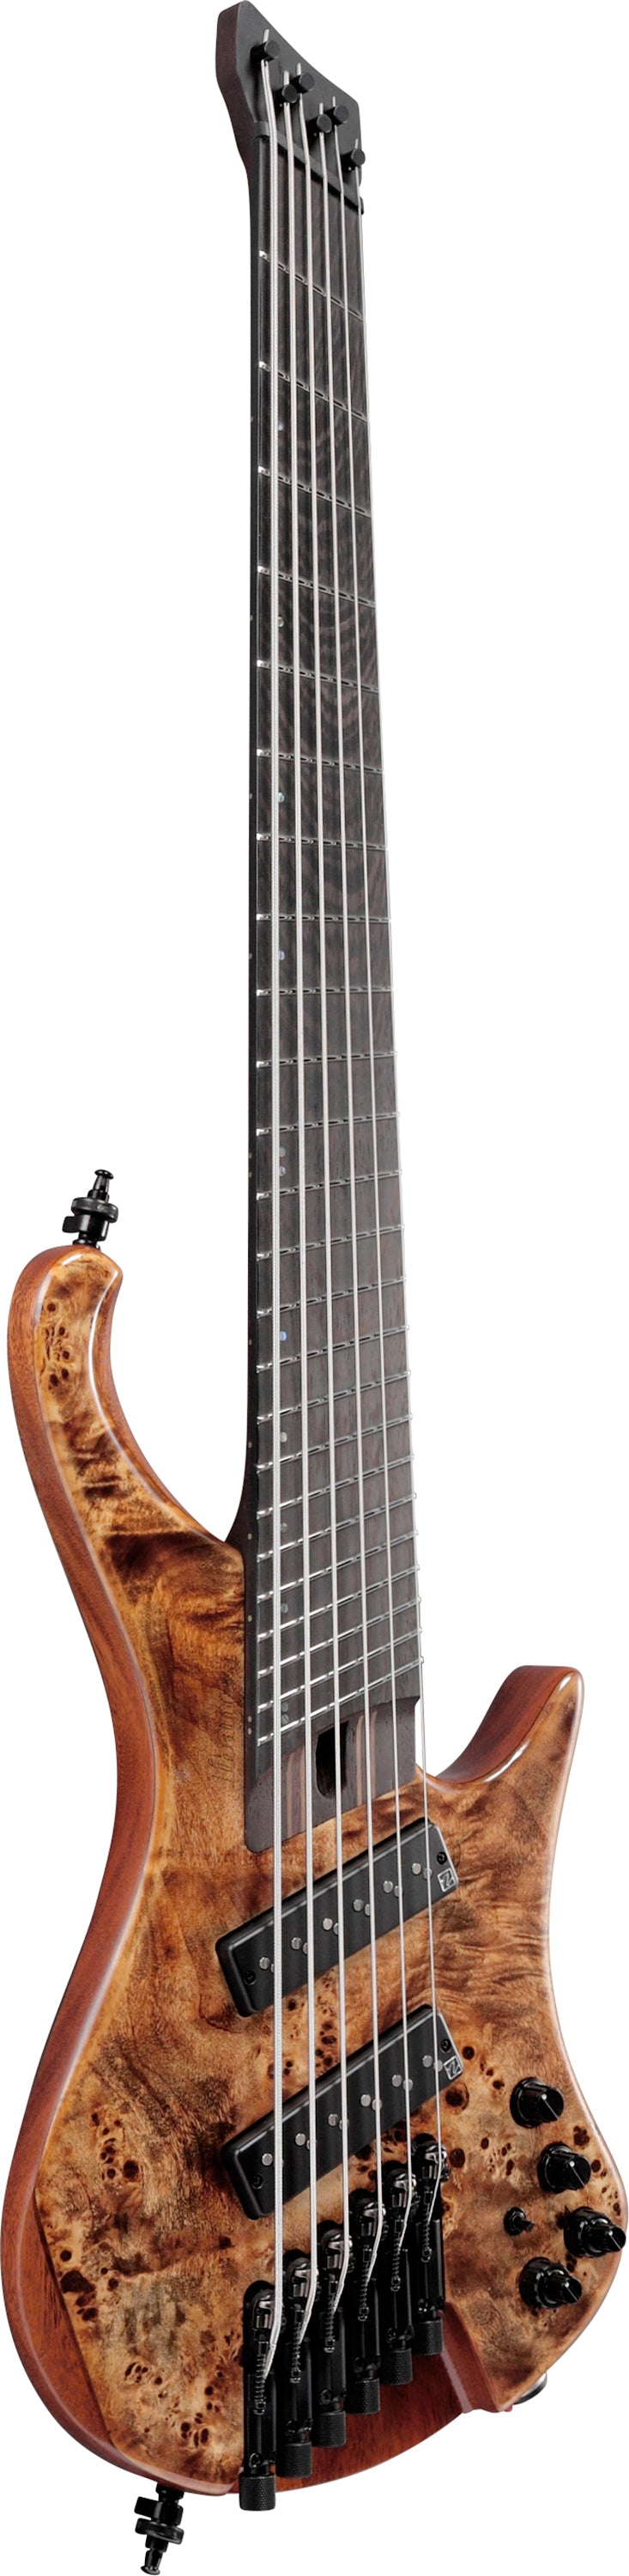 Ibanez EHB1506MSABL EHB Ergonomic Headless Bass 6 Strings Multiscale (Antique Brown Stained Low Gloss)